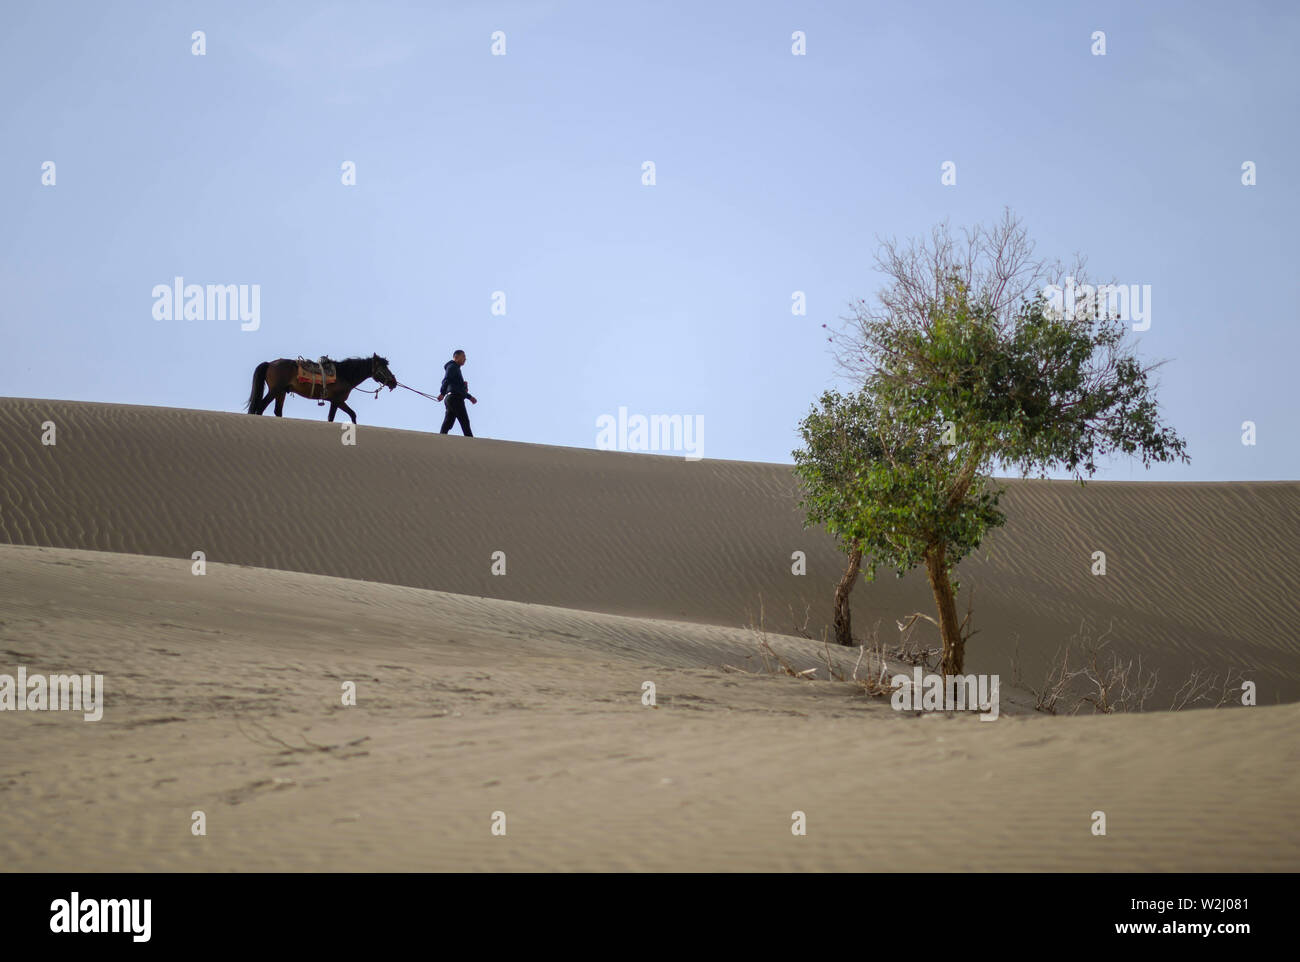 (190709) -- YULI, July 9, 2019 (Xinhua) -- Forest ranger Eli Niyaz walks in the desert with his horse in Yuli County, northwest China's Xinjiang Uygur Autonomous Region, June 19, 2019. Wriggling along the rim of the Taklimakan desert, the 1,321-km-long Tarim River in northwest China's Xinjiang Uygur Autonomous Region nurtures the largest area of populus euphratica forests in the world.   As local government launched a project on populus euphratica forest restoration along the Tarim River three years ago, the vegetation has been increasing and forest rangers have been playing a more and more im Stock Photo